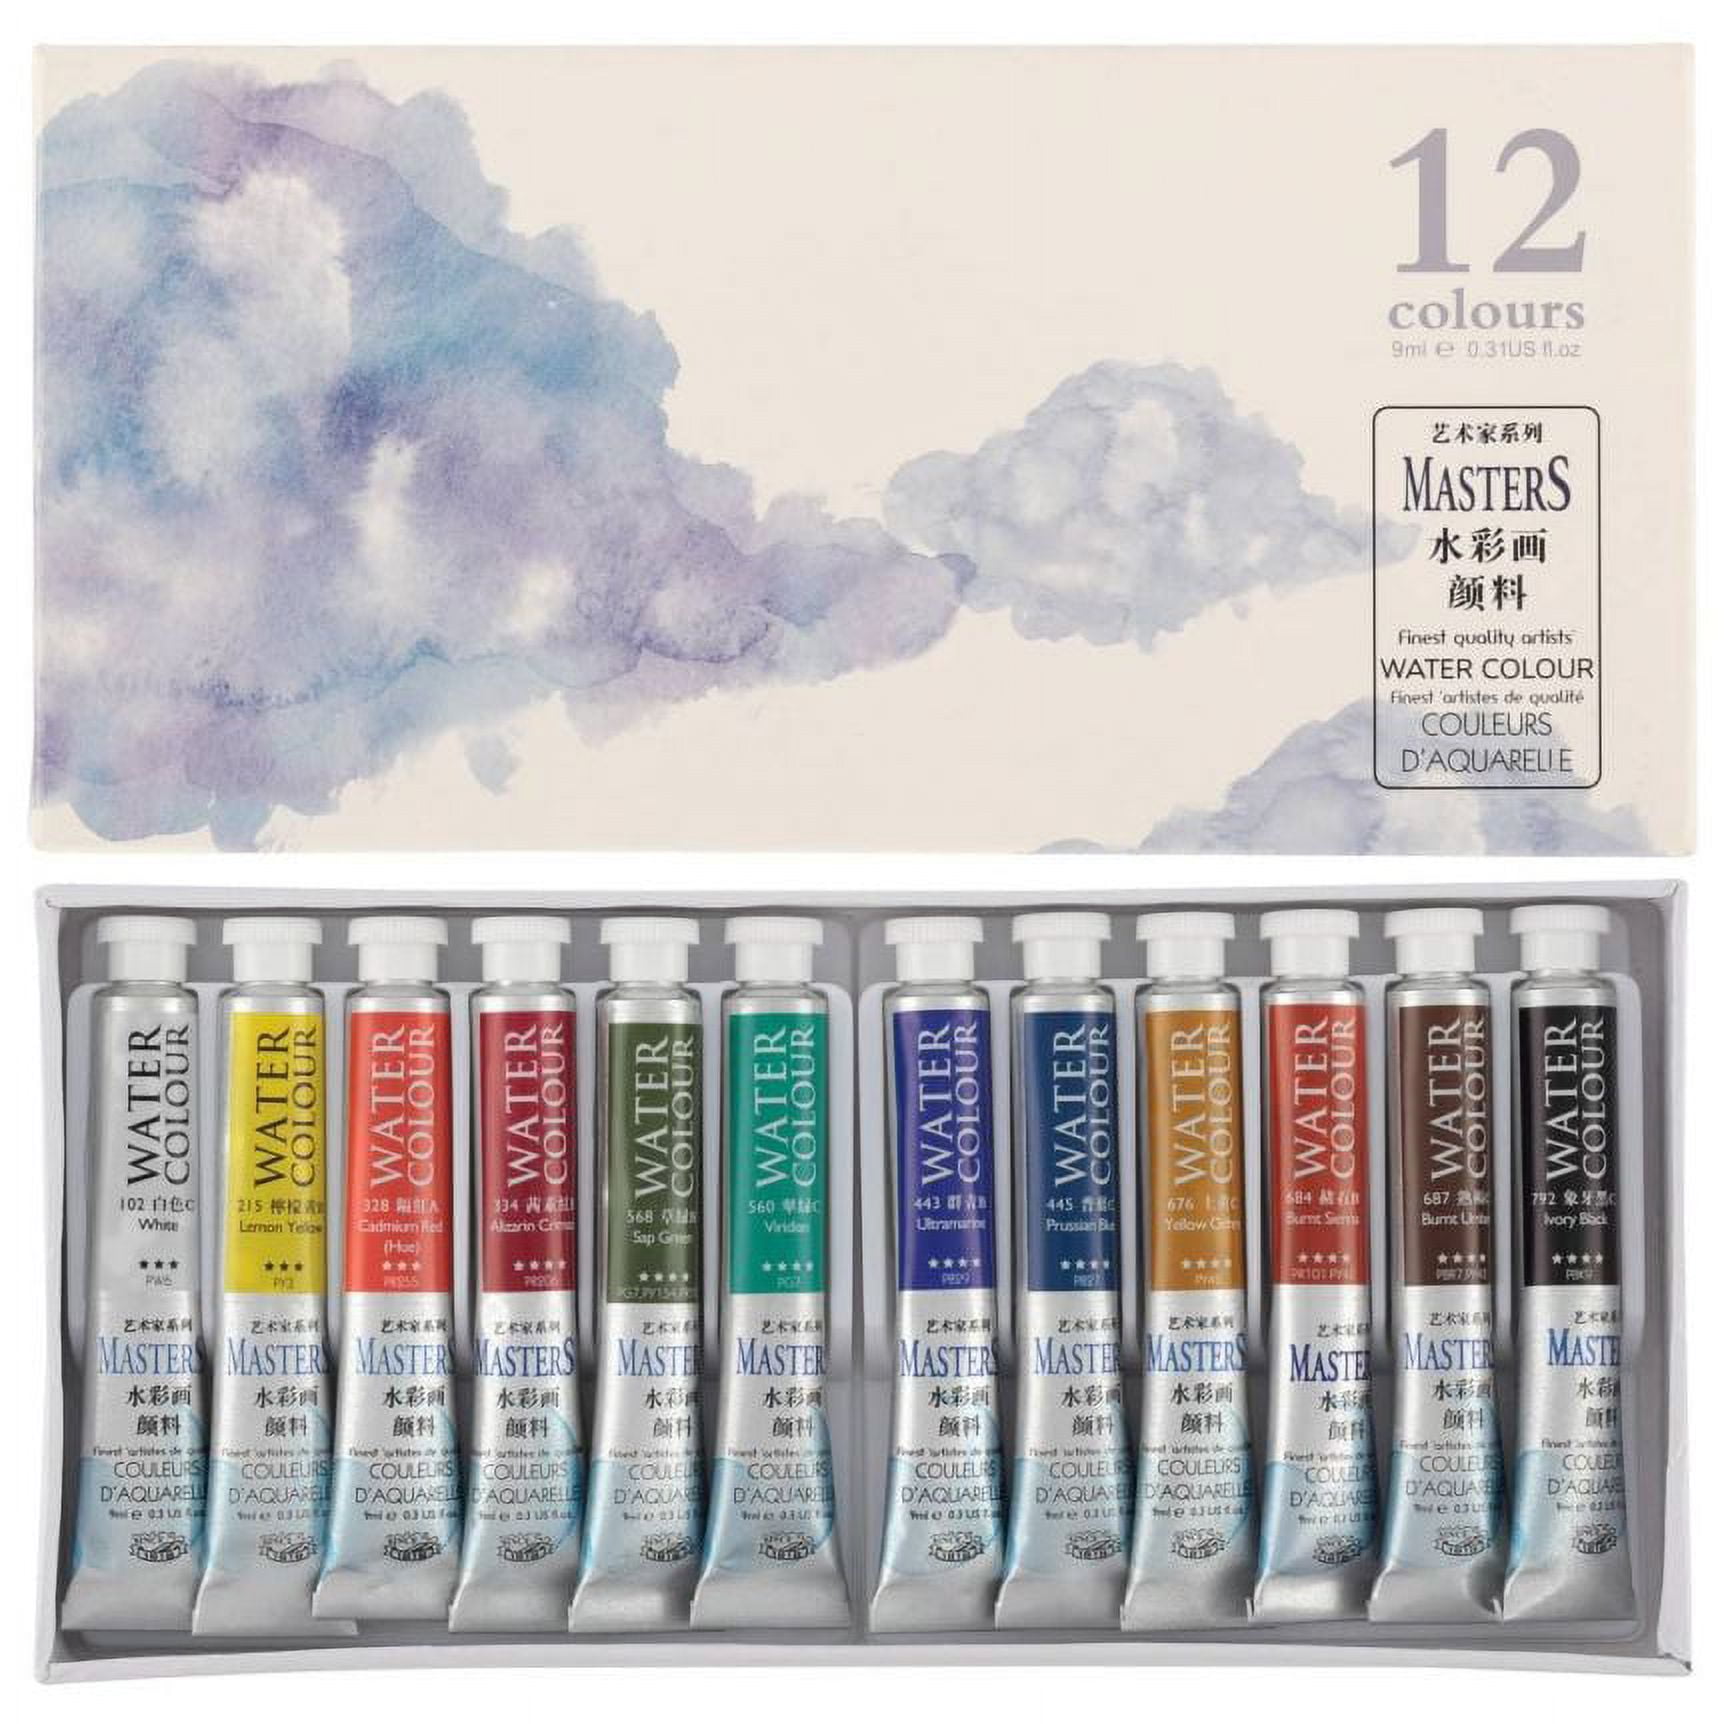 Watercolor Painting Set, 50 Vivid Colors in Portable Box, Include Brush Palette Sponge, Travel Watercolor Set for Children to Adults, Watercolor